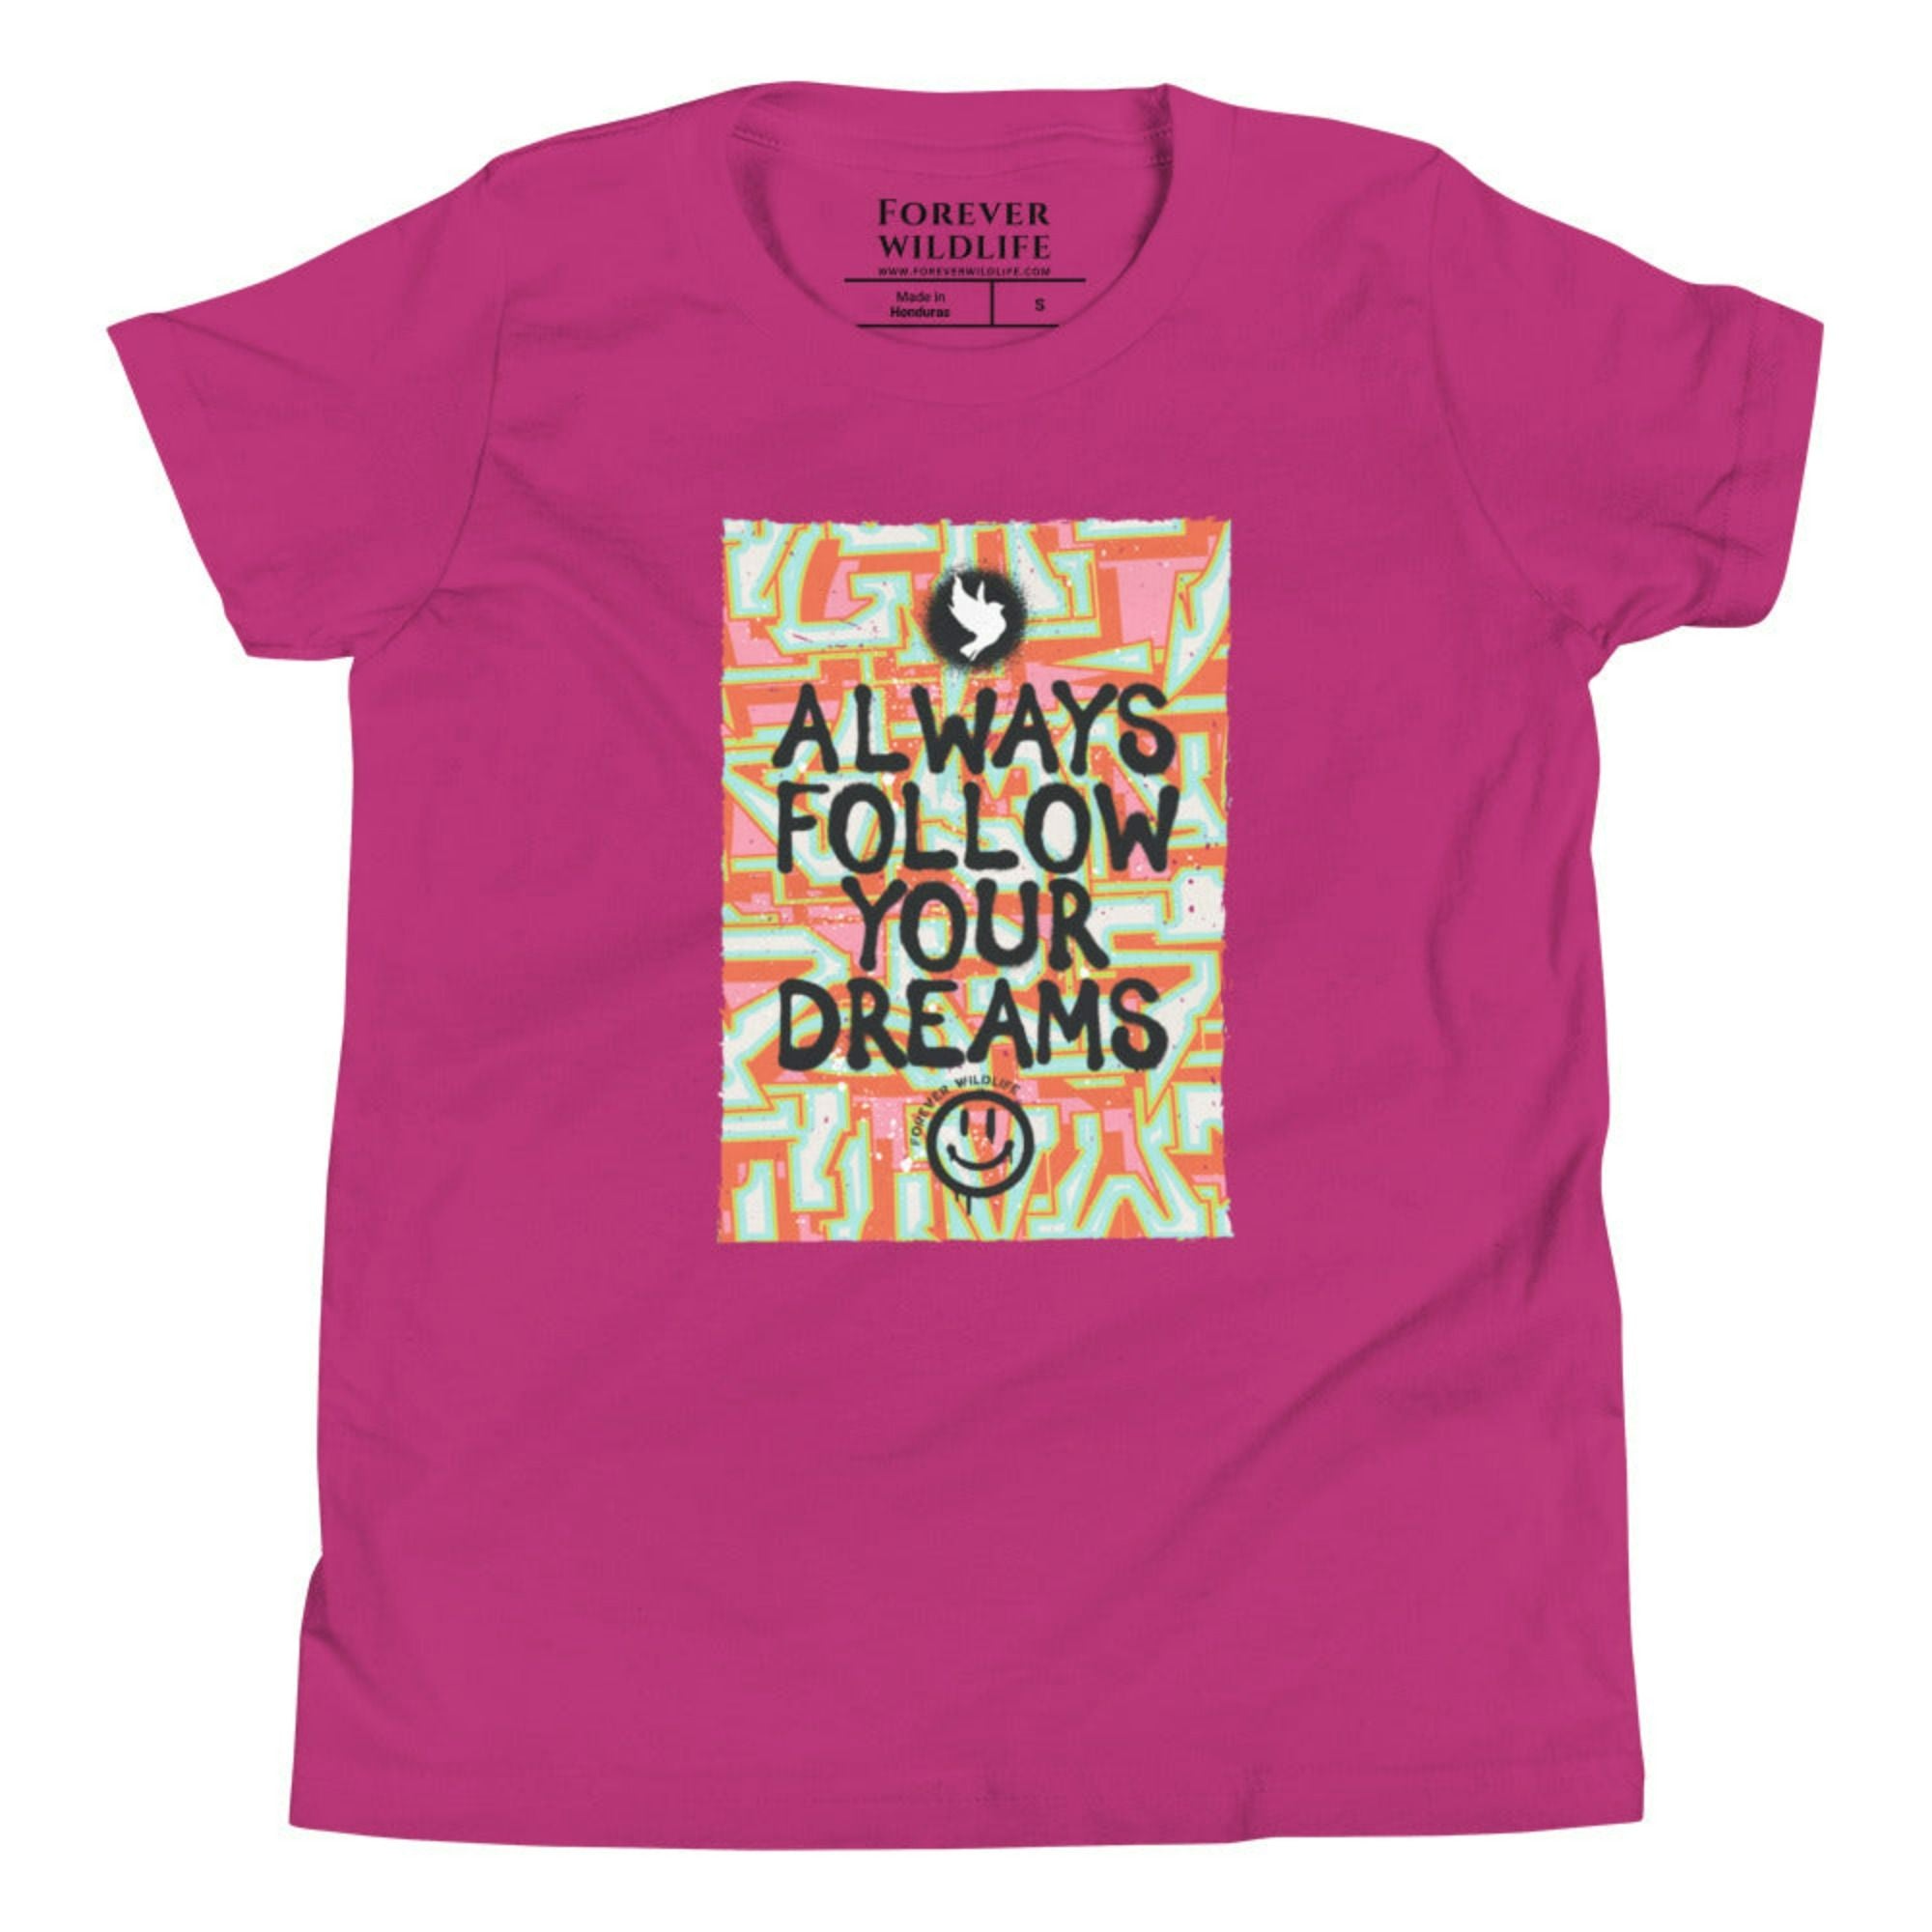 Berry Dove Youth T-Shirt with Dove graphic as part of Wildlife T Shirts, Wildlife Clothing & Apparel by Forever Wildlife